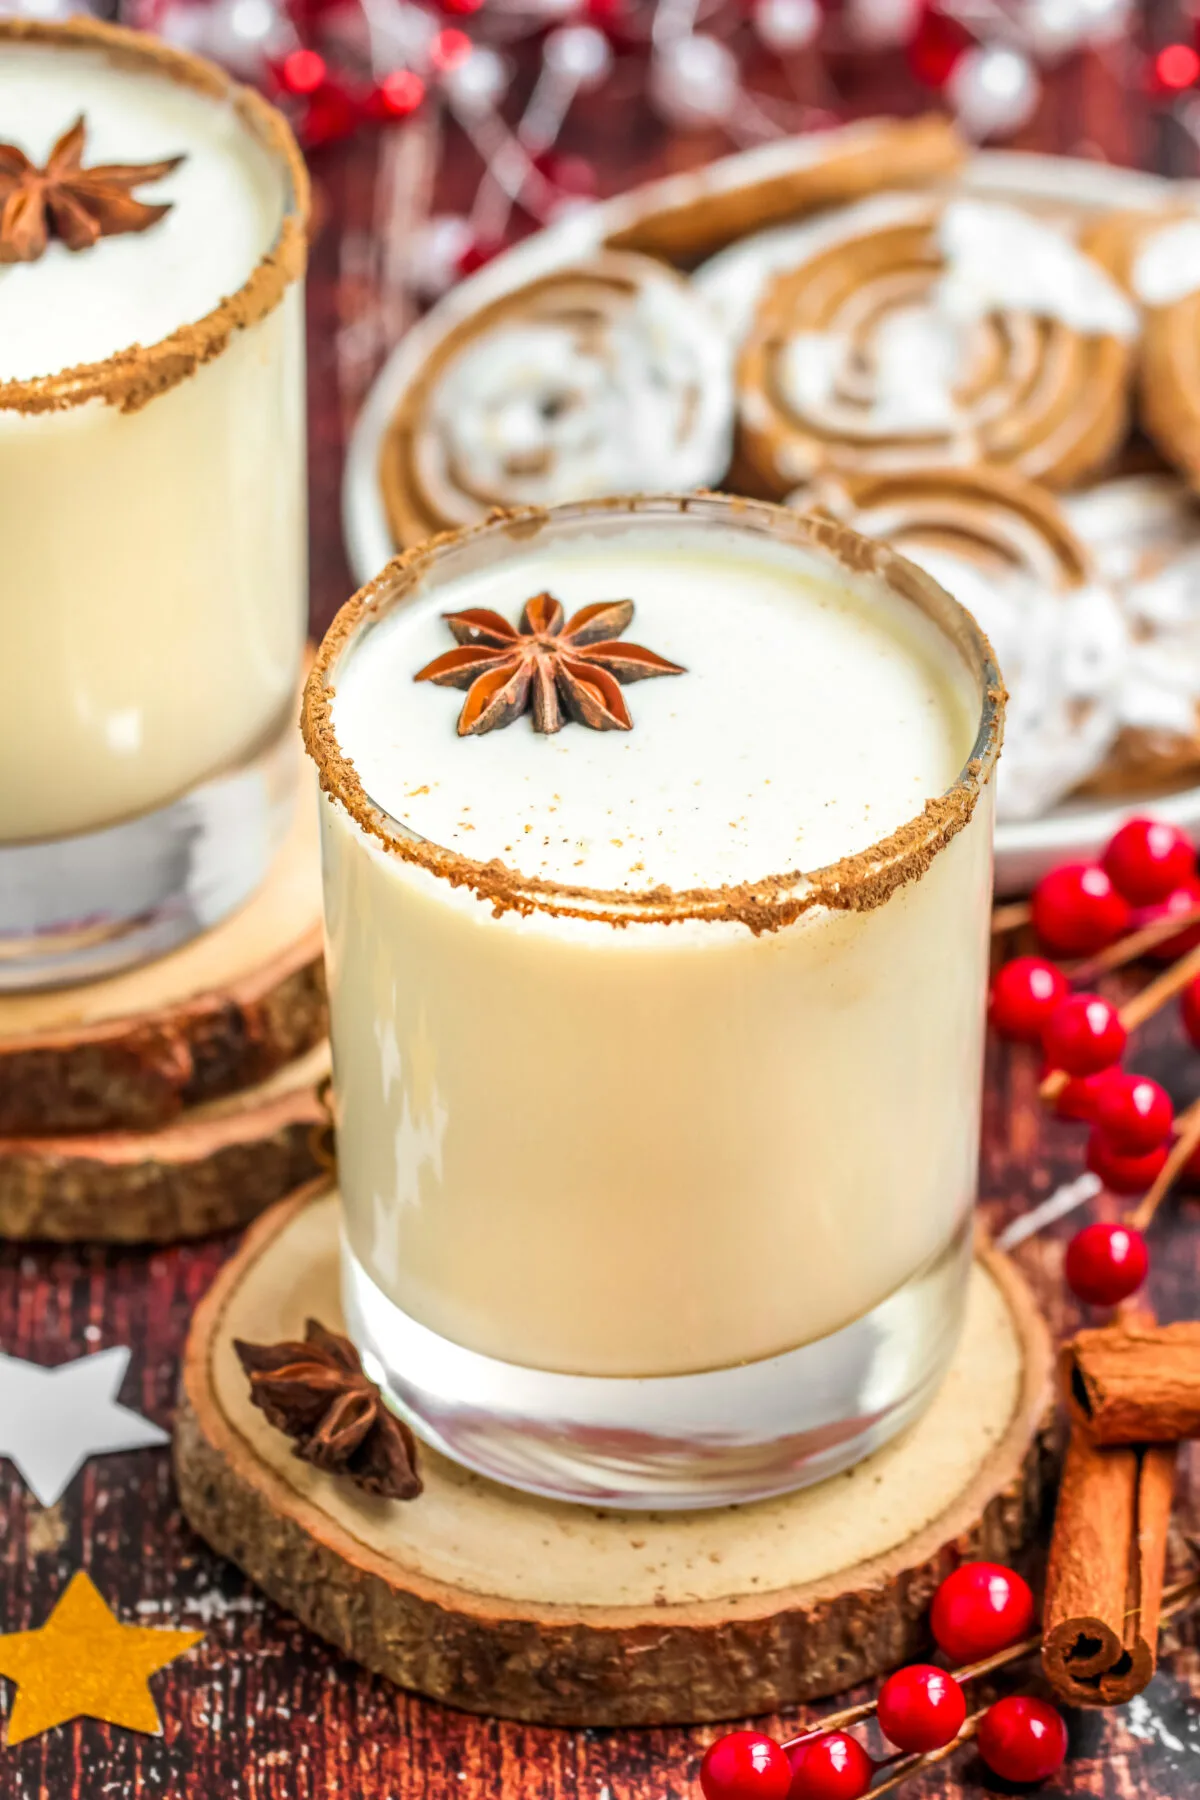 Looking for a great tasting homemade eggnog recipe? This one is rich and creamy and tastes better than the store-bought stuff!